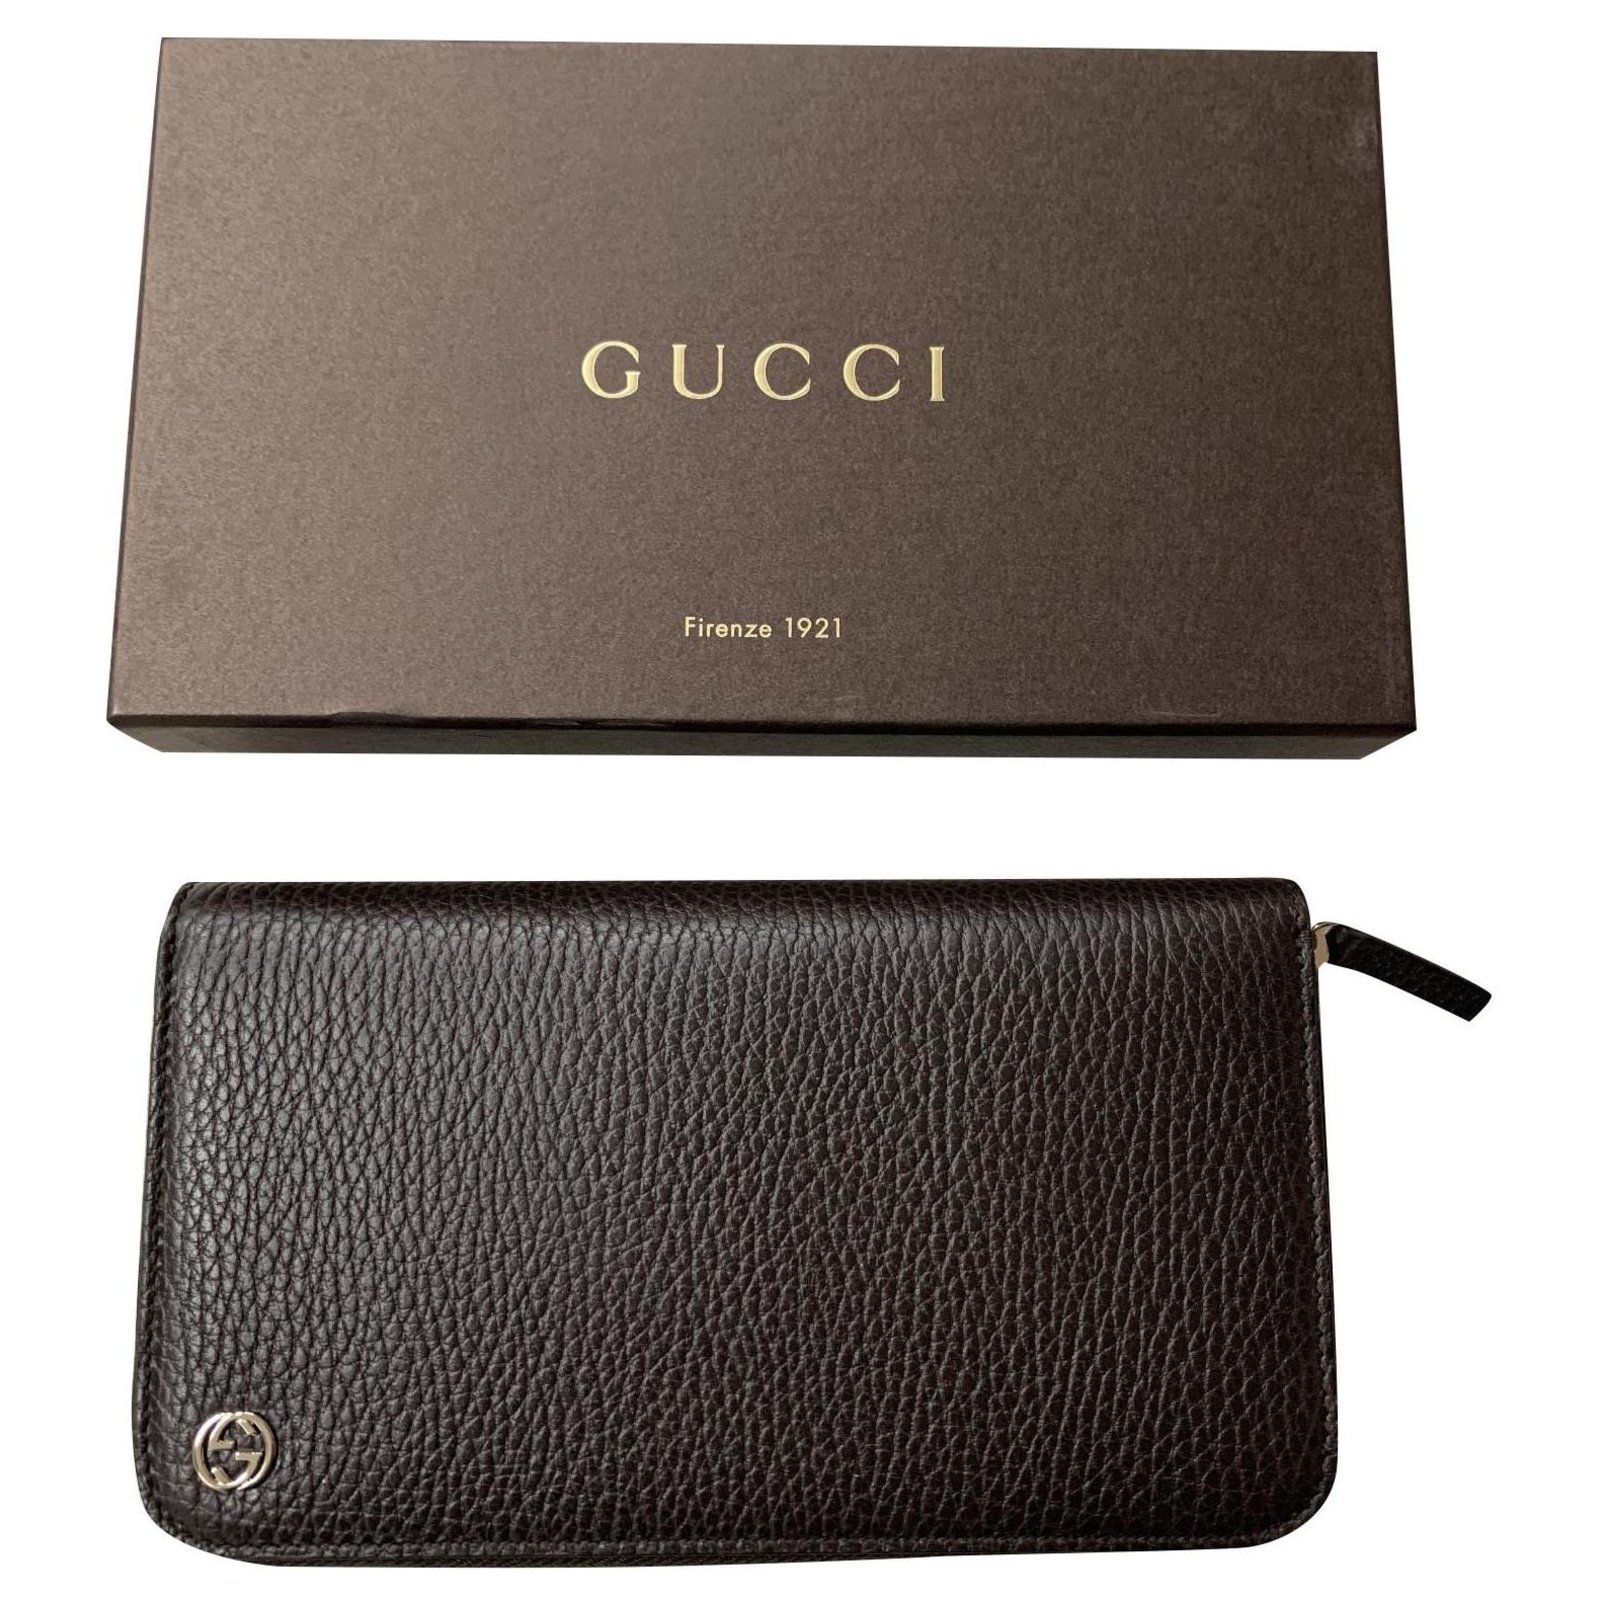 leather mini wallet with gucci logo